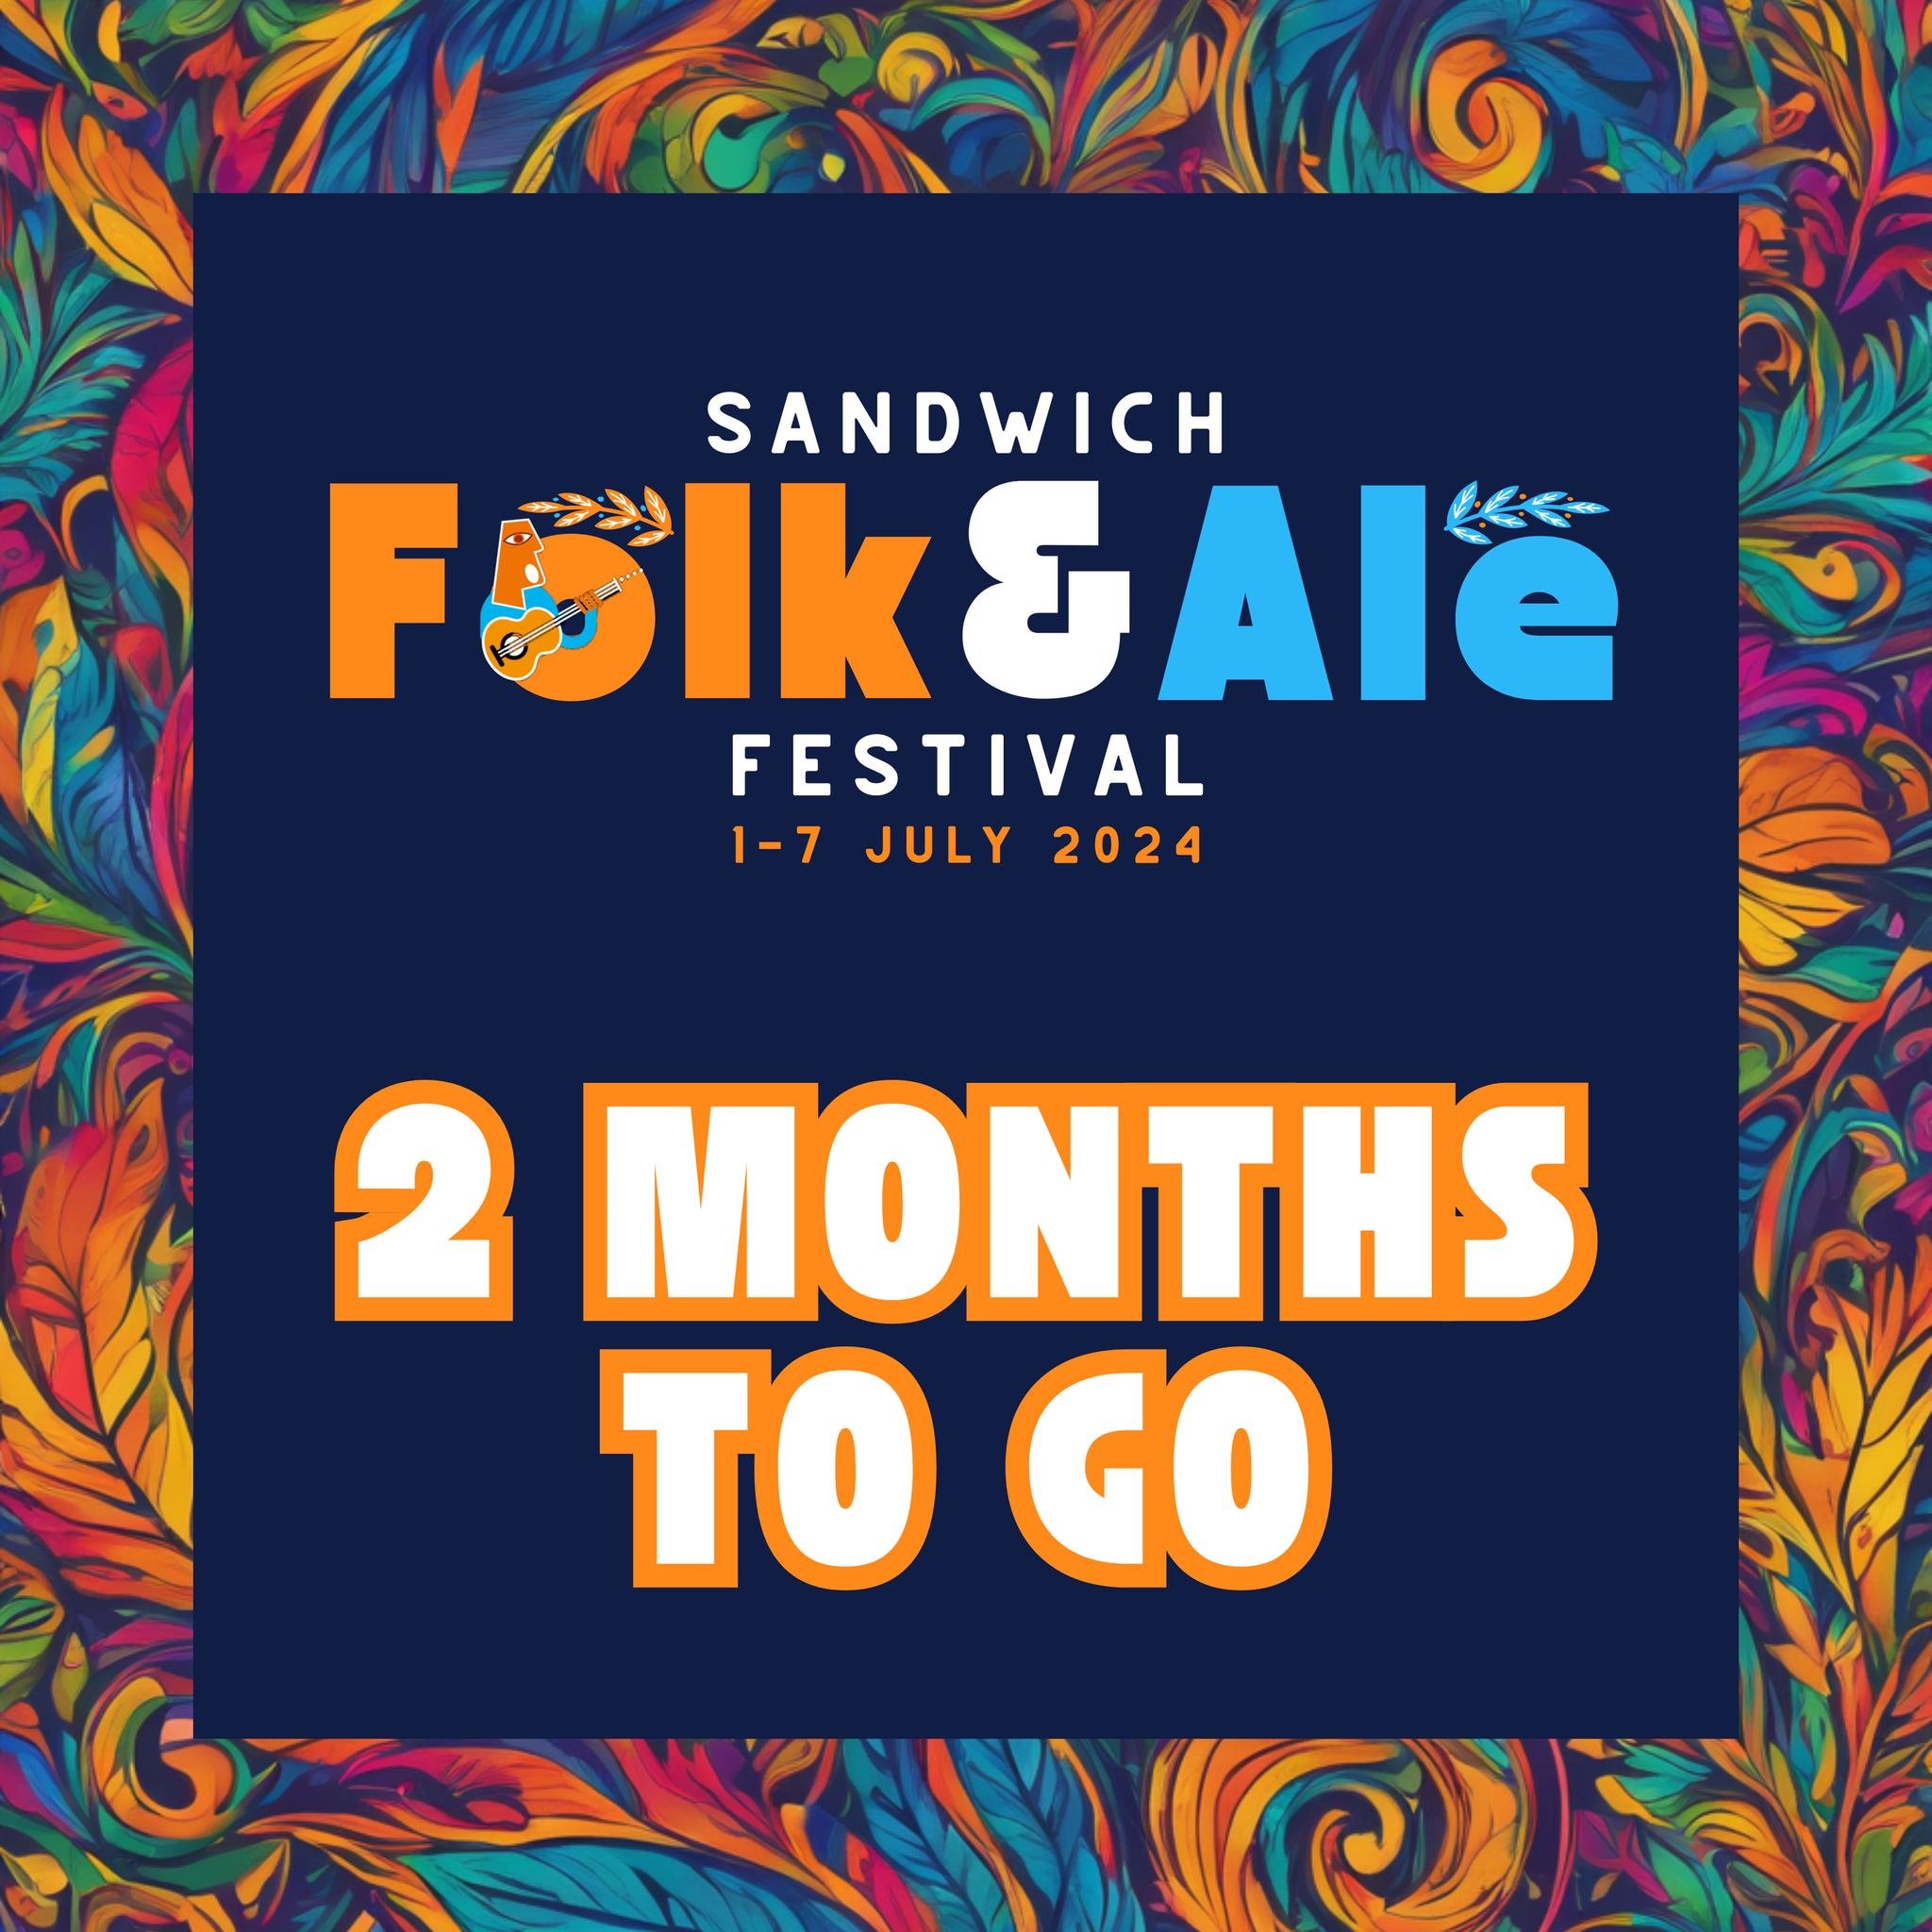 🎉 Just 2 Months to Go! 🎶 The countdown to this year's Sandwich Folk &amp; Ale Festival is officially on! 🌞 Get ready for a week filled with fantastic music, refreshing ales, and unforgettable memories! 🍻 With warmer weather (hopefully) on the hor